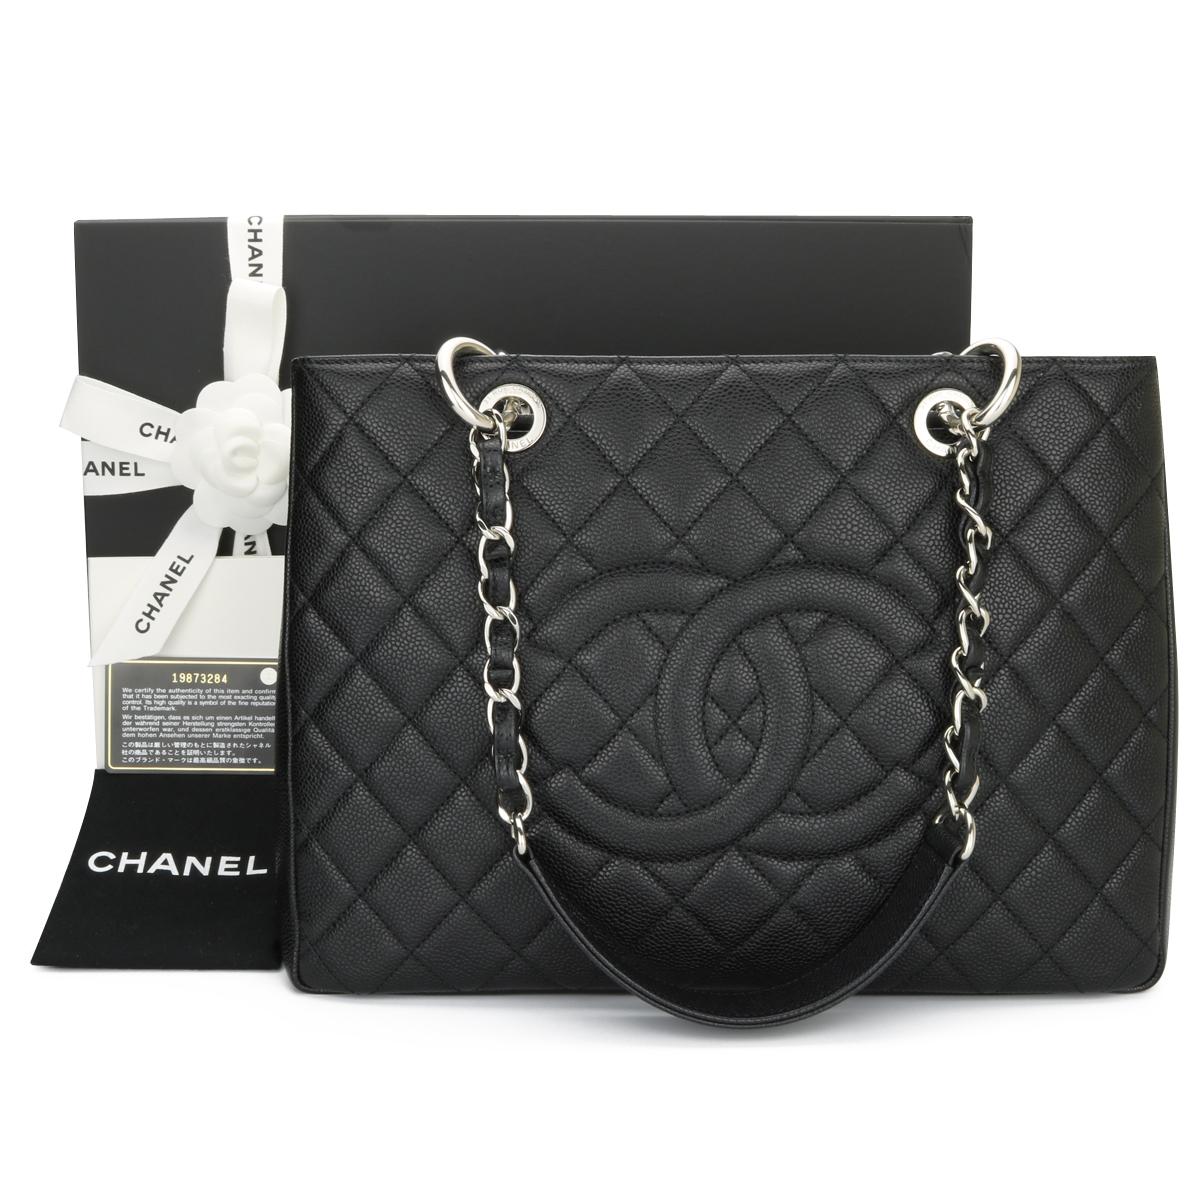 CHANEL Grand Shopping Tote (GST) Bag Black Caviar with Silver Hardware 2014.

This bag is in pristine condition, the bag still holds its original shape, and the hardware is still shiny.

Exterior Condition: Mint condition, corners show no visible